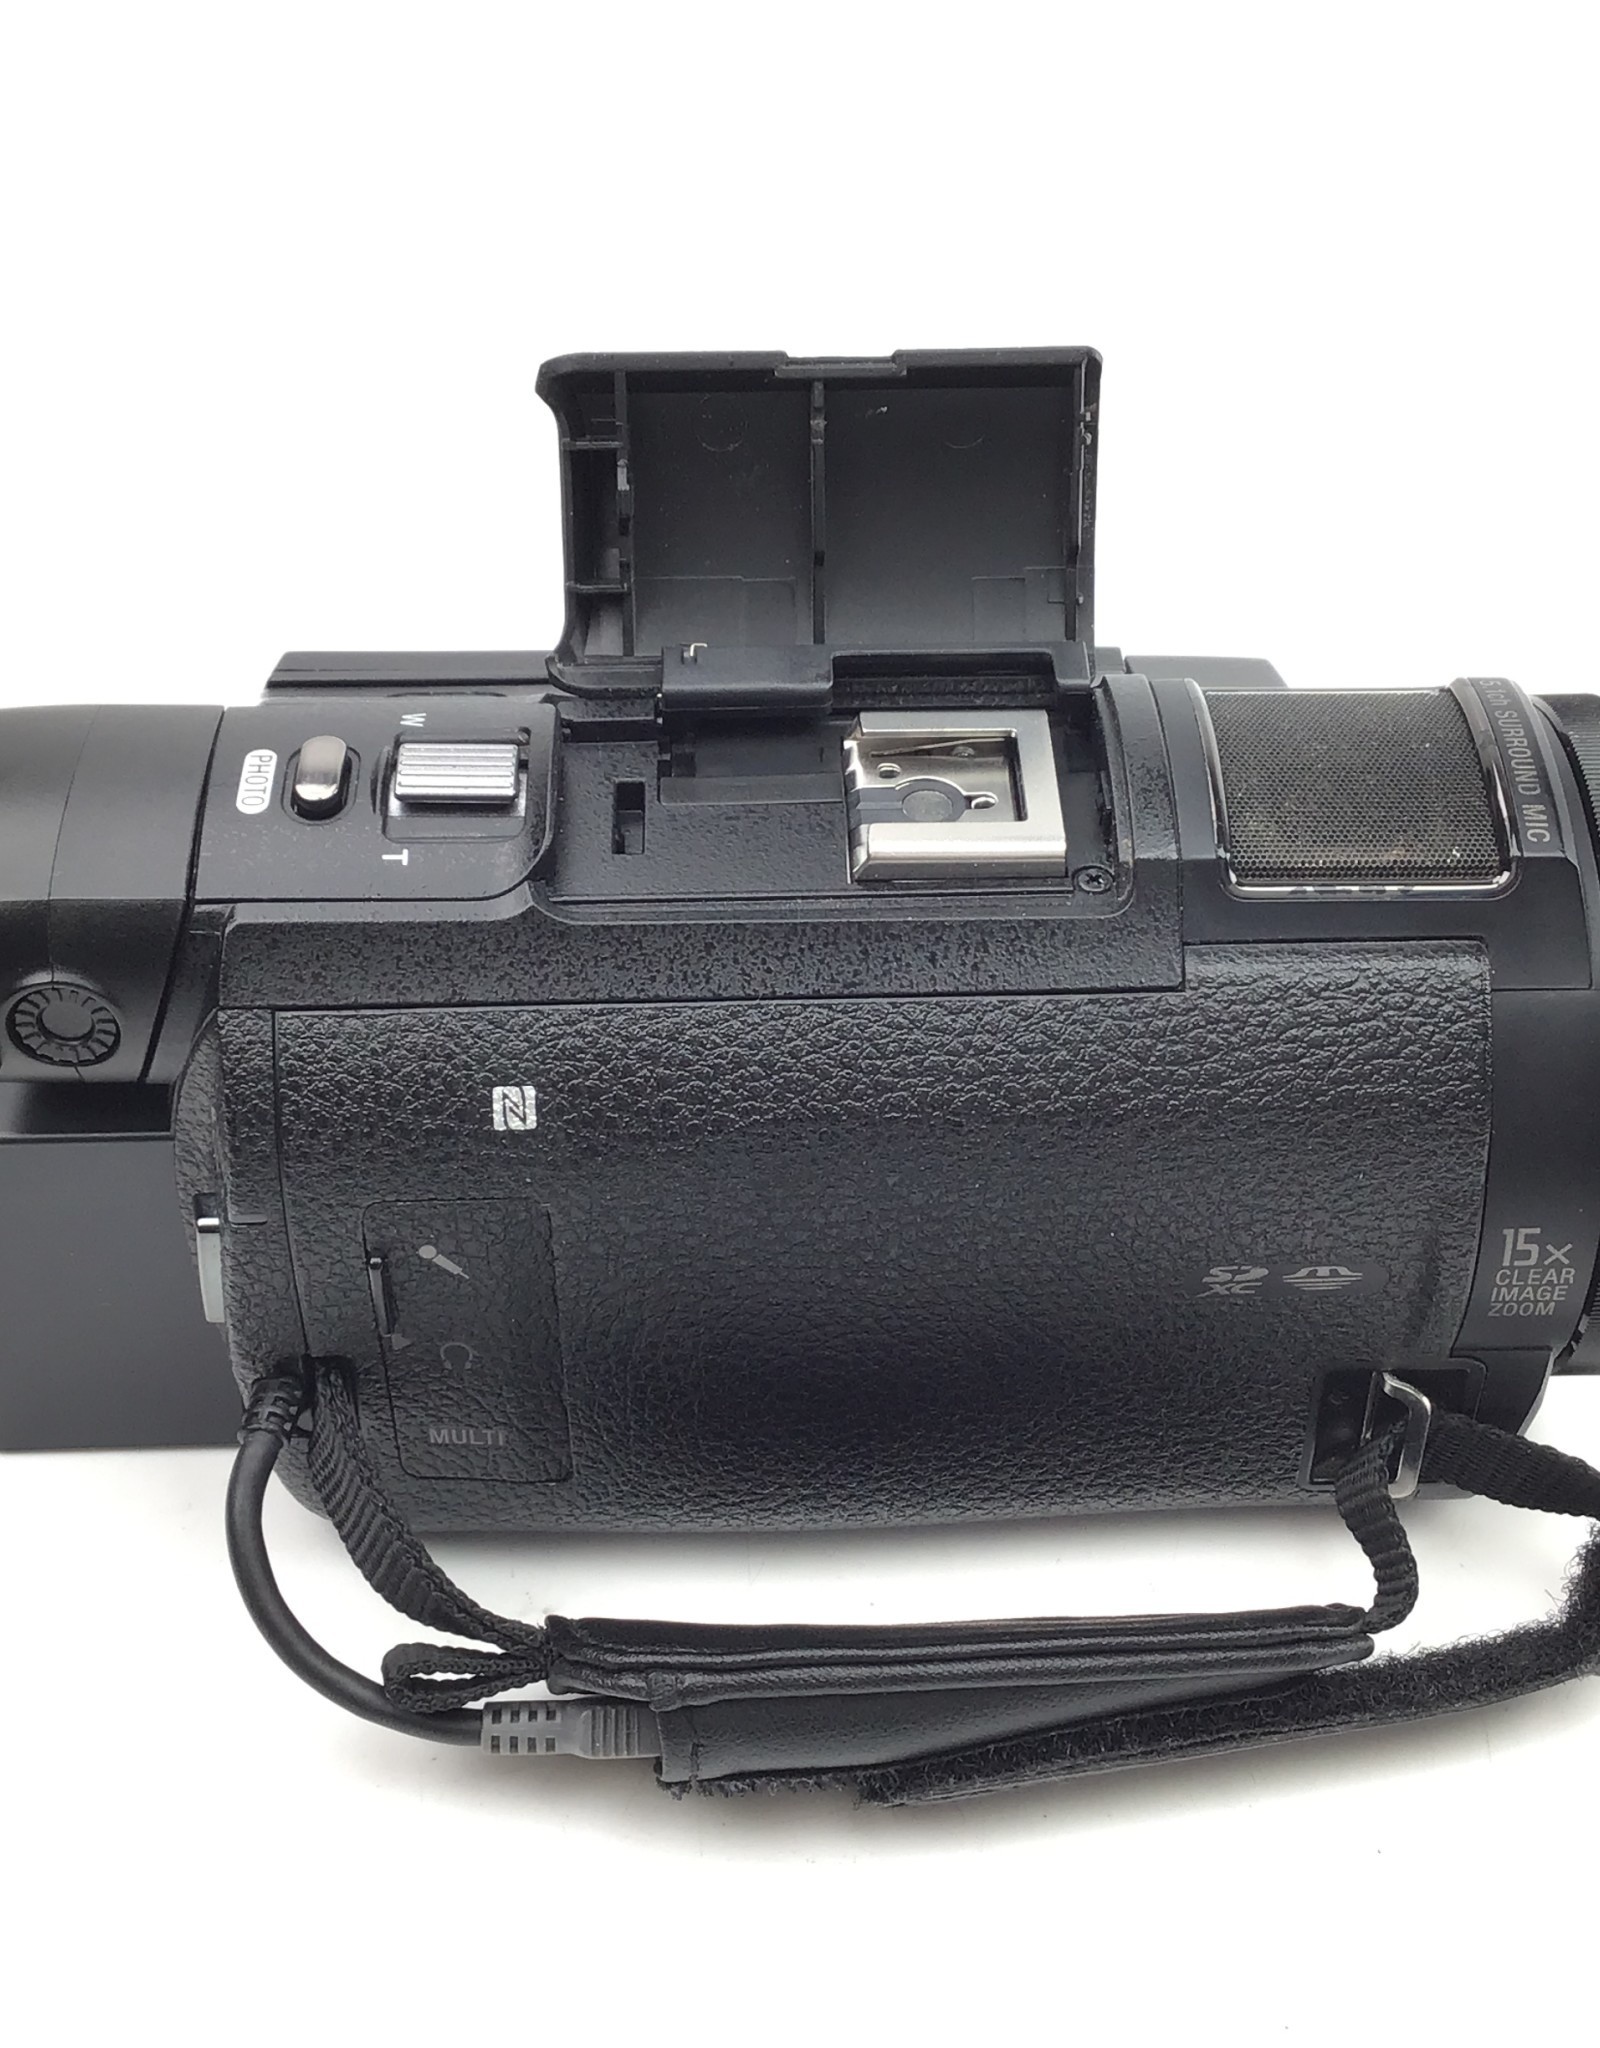 SONY Sony FDR-AX33 Camcorder Used Good